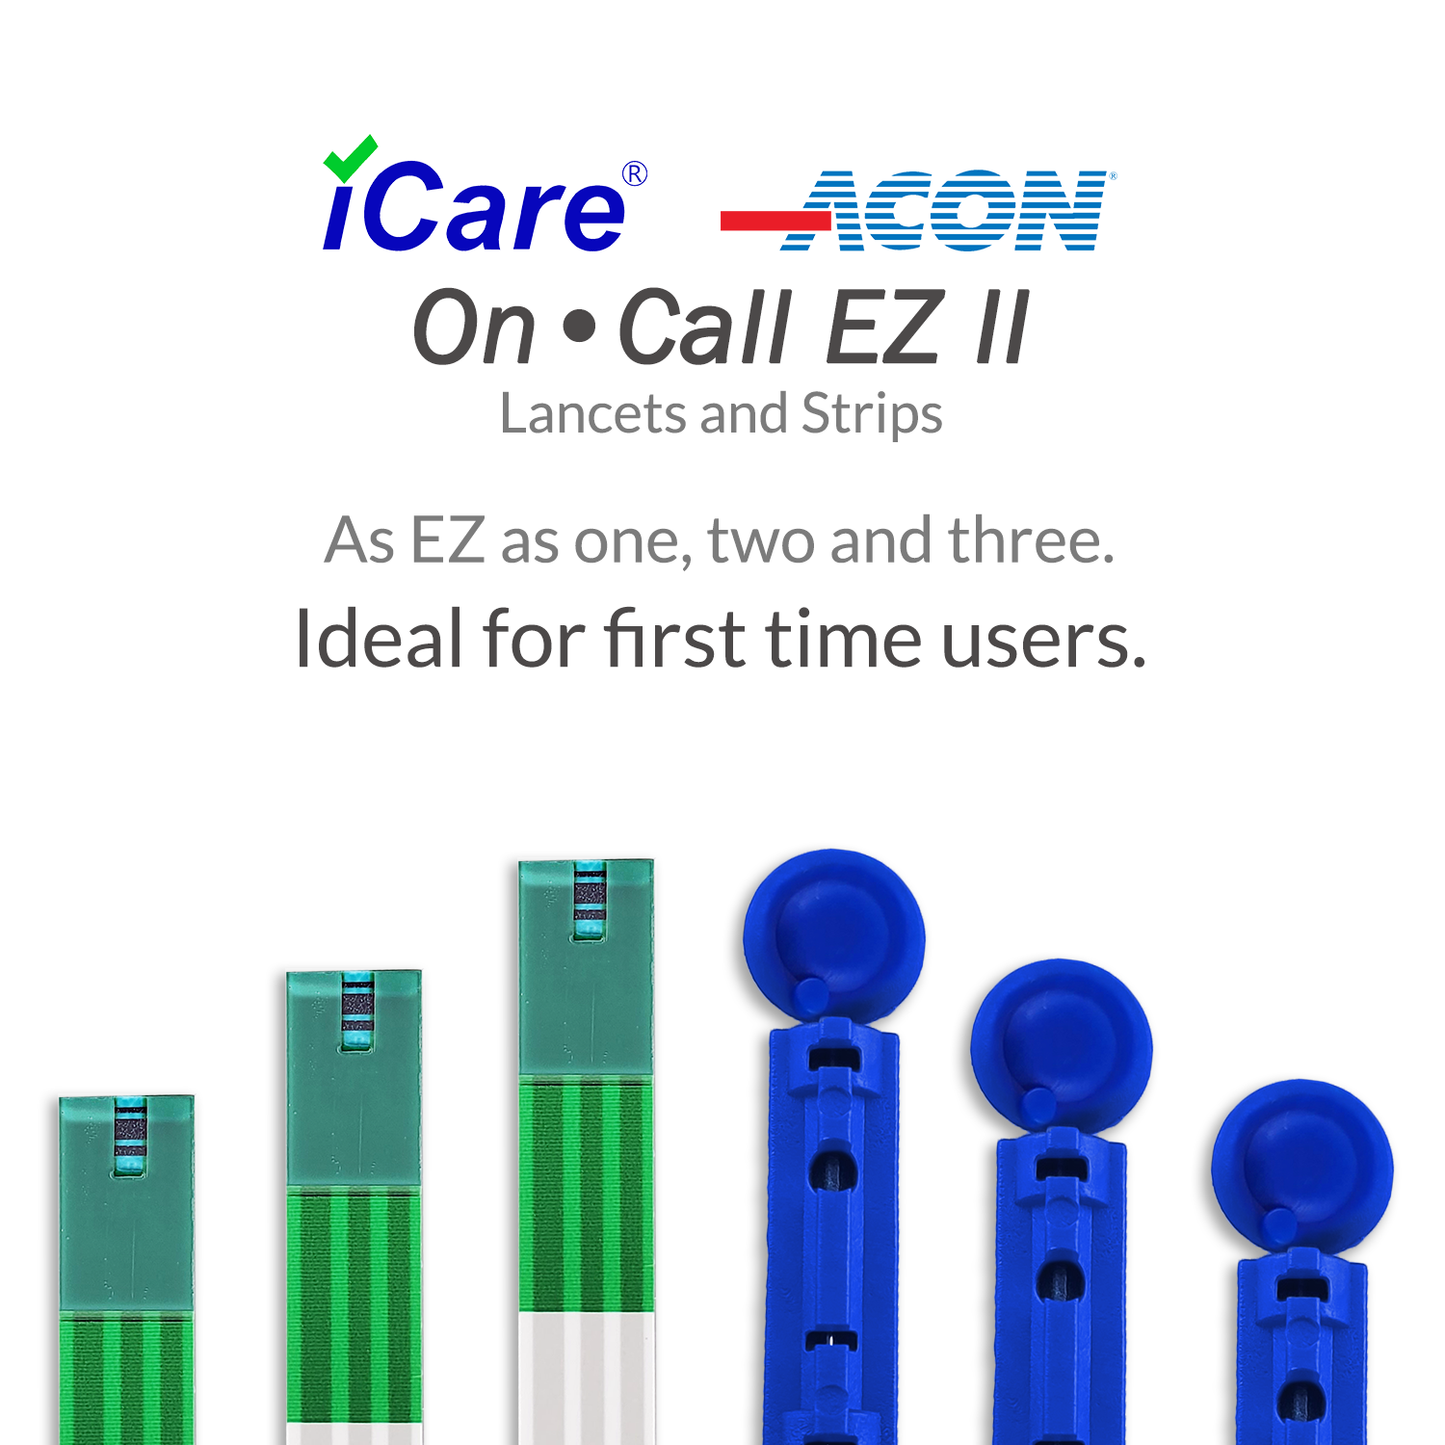 iCare® On Call EZII Test Strips 25/50/100 Pieces in Vial with Free Sterile Lancets➜ ONLY COMPATIBLE WITH EZII GLUCOSE METER